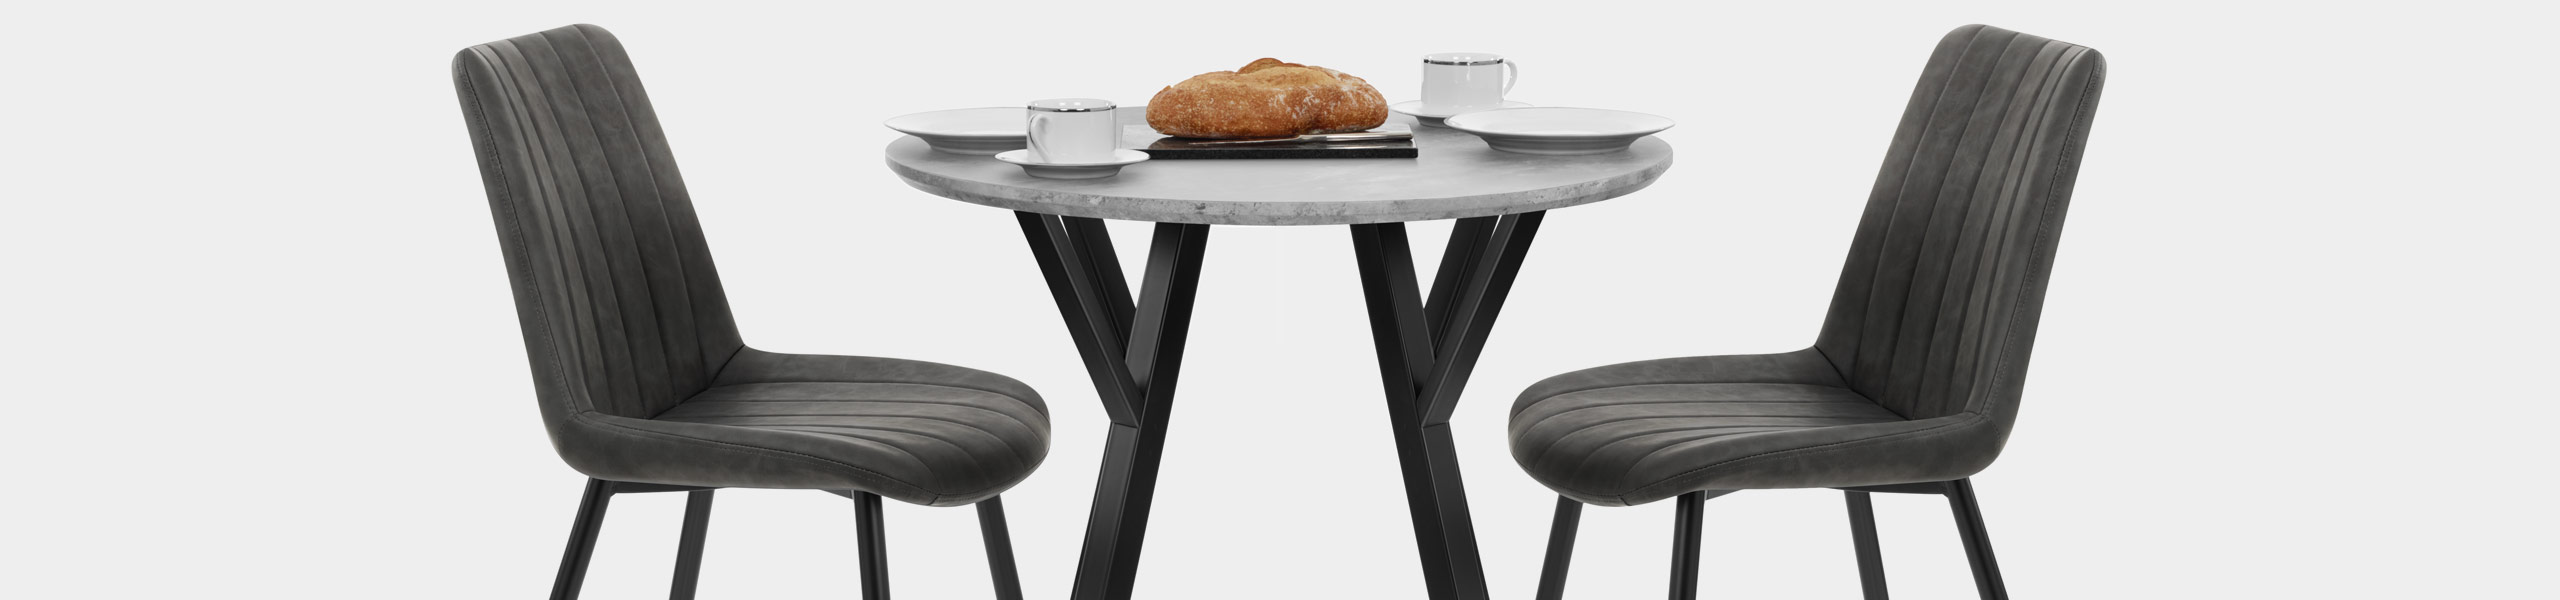 Wessex Dining Set Concrete & Charcoal Video Banner